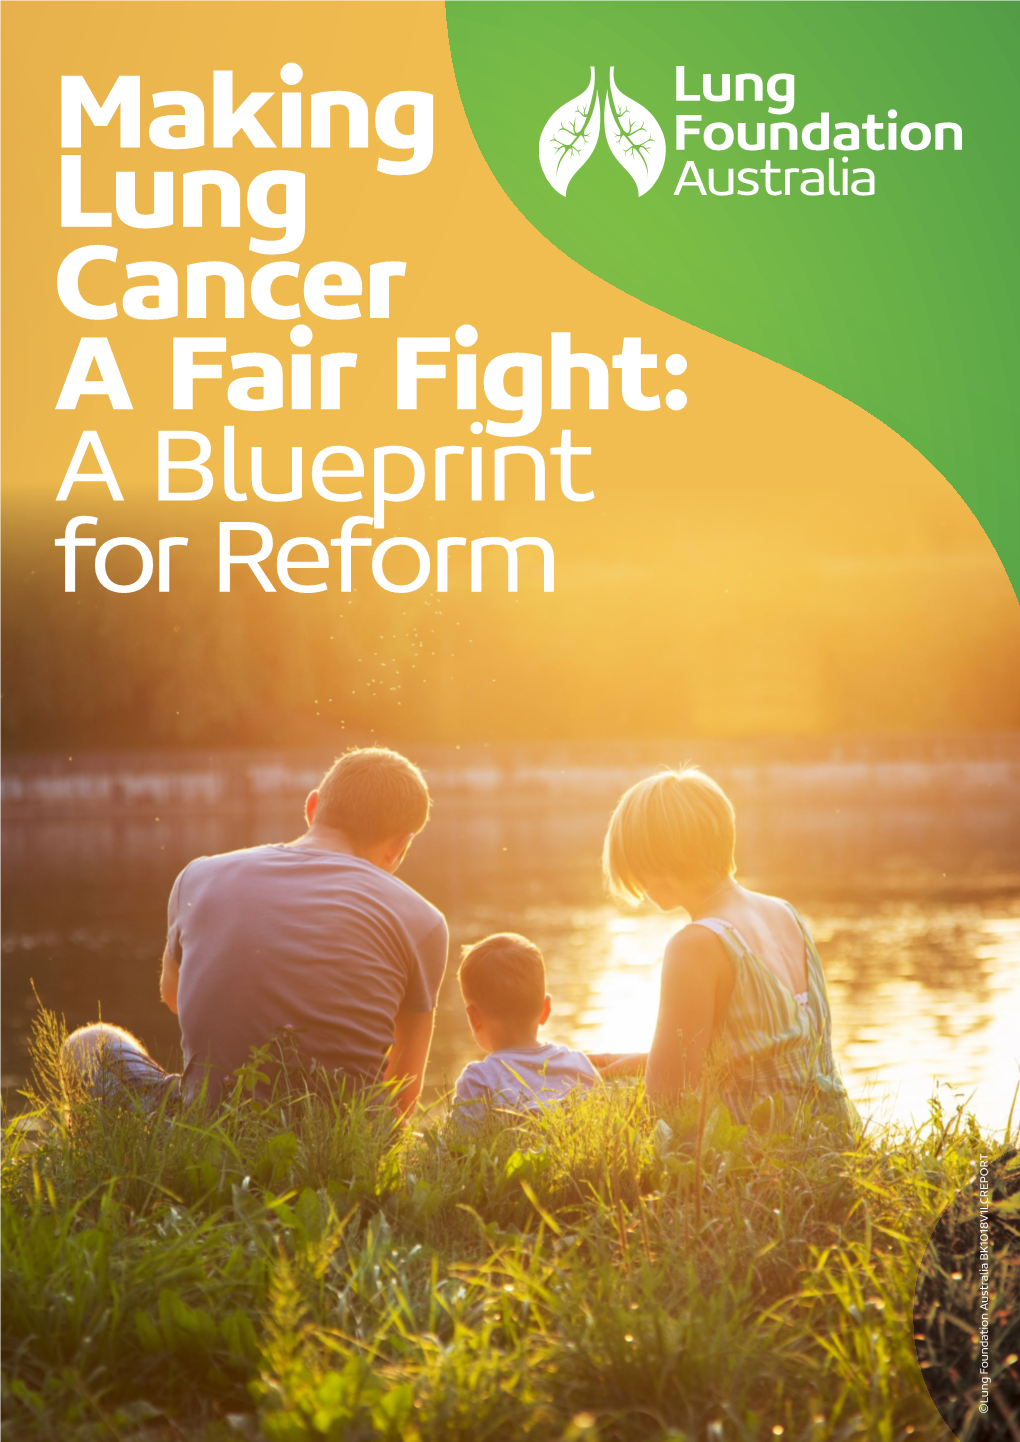 Making Lung Cancer a Fair Fight: a Blueprint for Reform